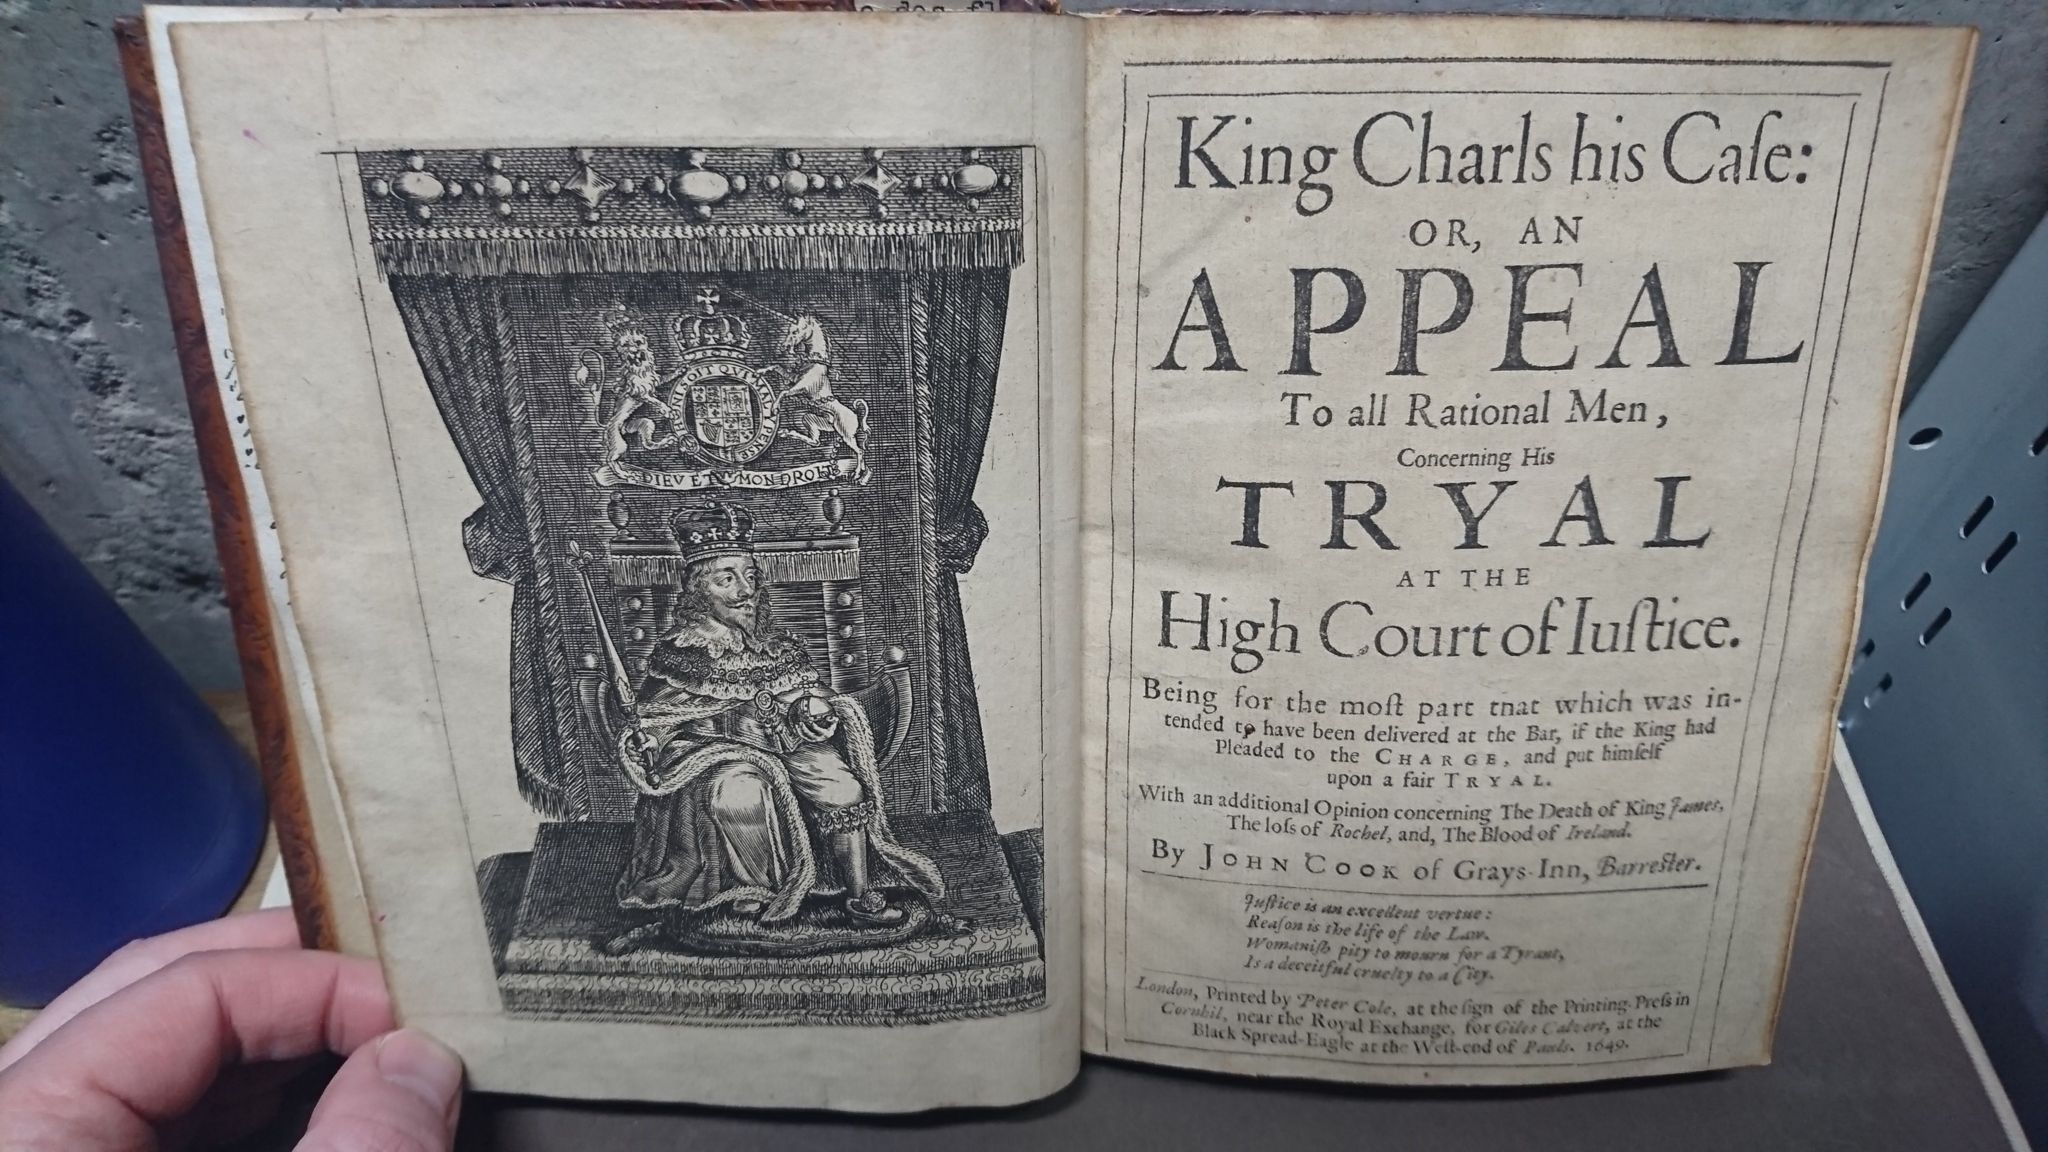 Court report of the trial - or 'tryal' - of King Charles I